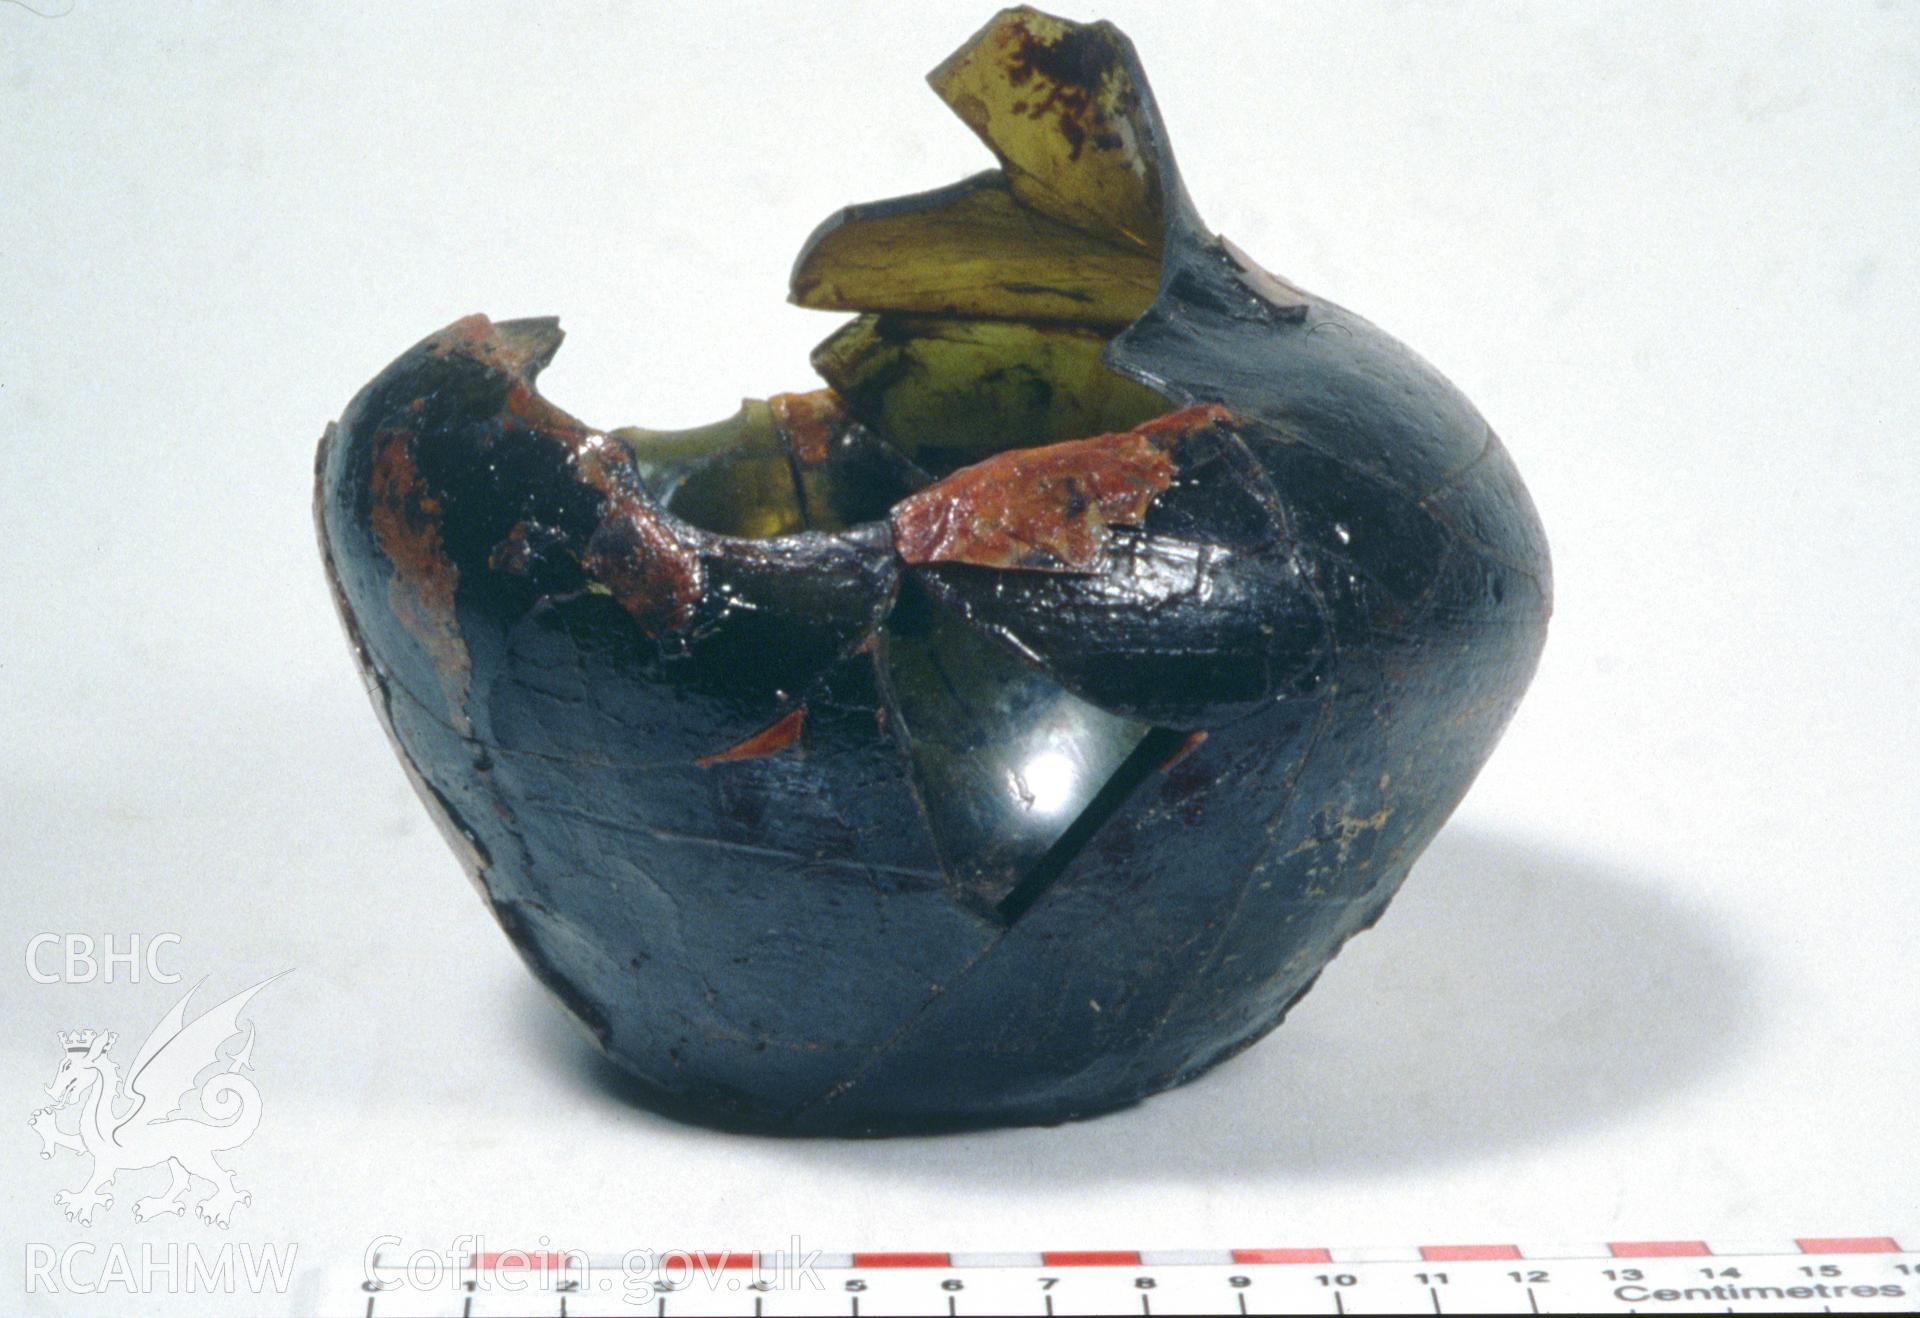 Colour slide showing find from site, broken pottery vessel, from a survey of the Mary designated shipwreck, courtesy of National Museums, Liverpool (Merseyside Maritime Museum)